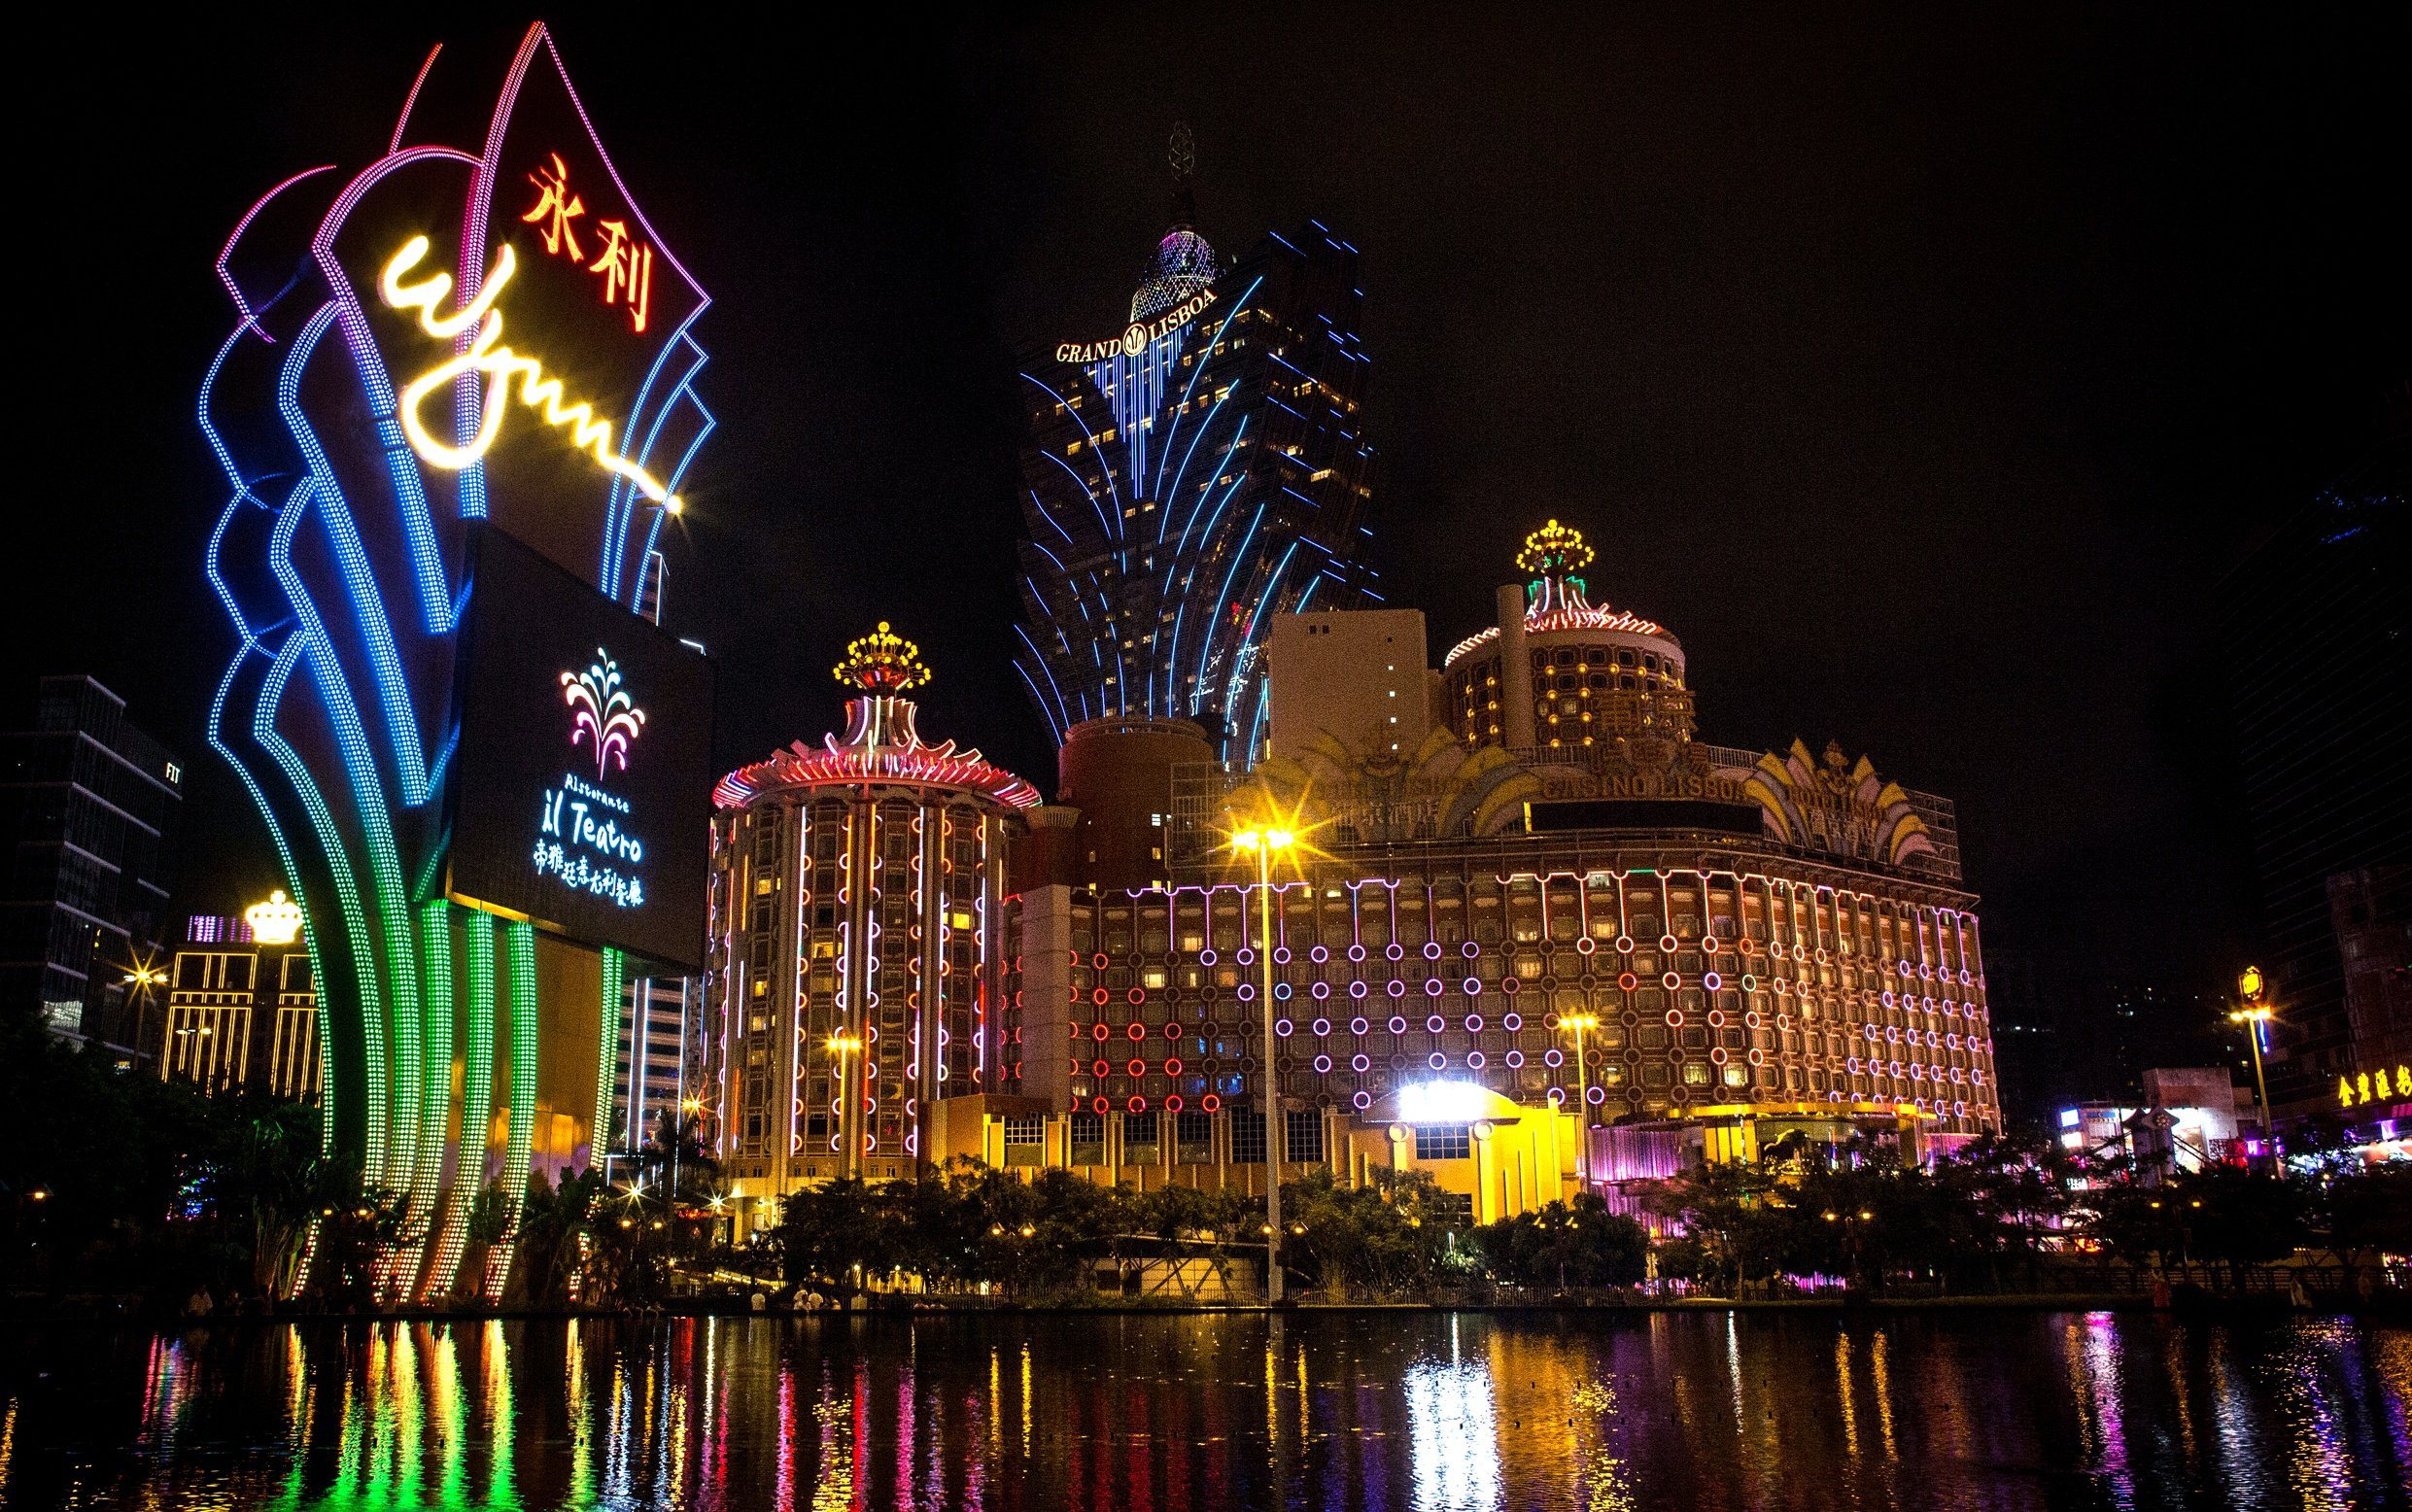 Macau casino stocks move another leg down amid continued junket crackdown.